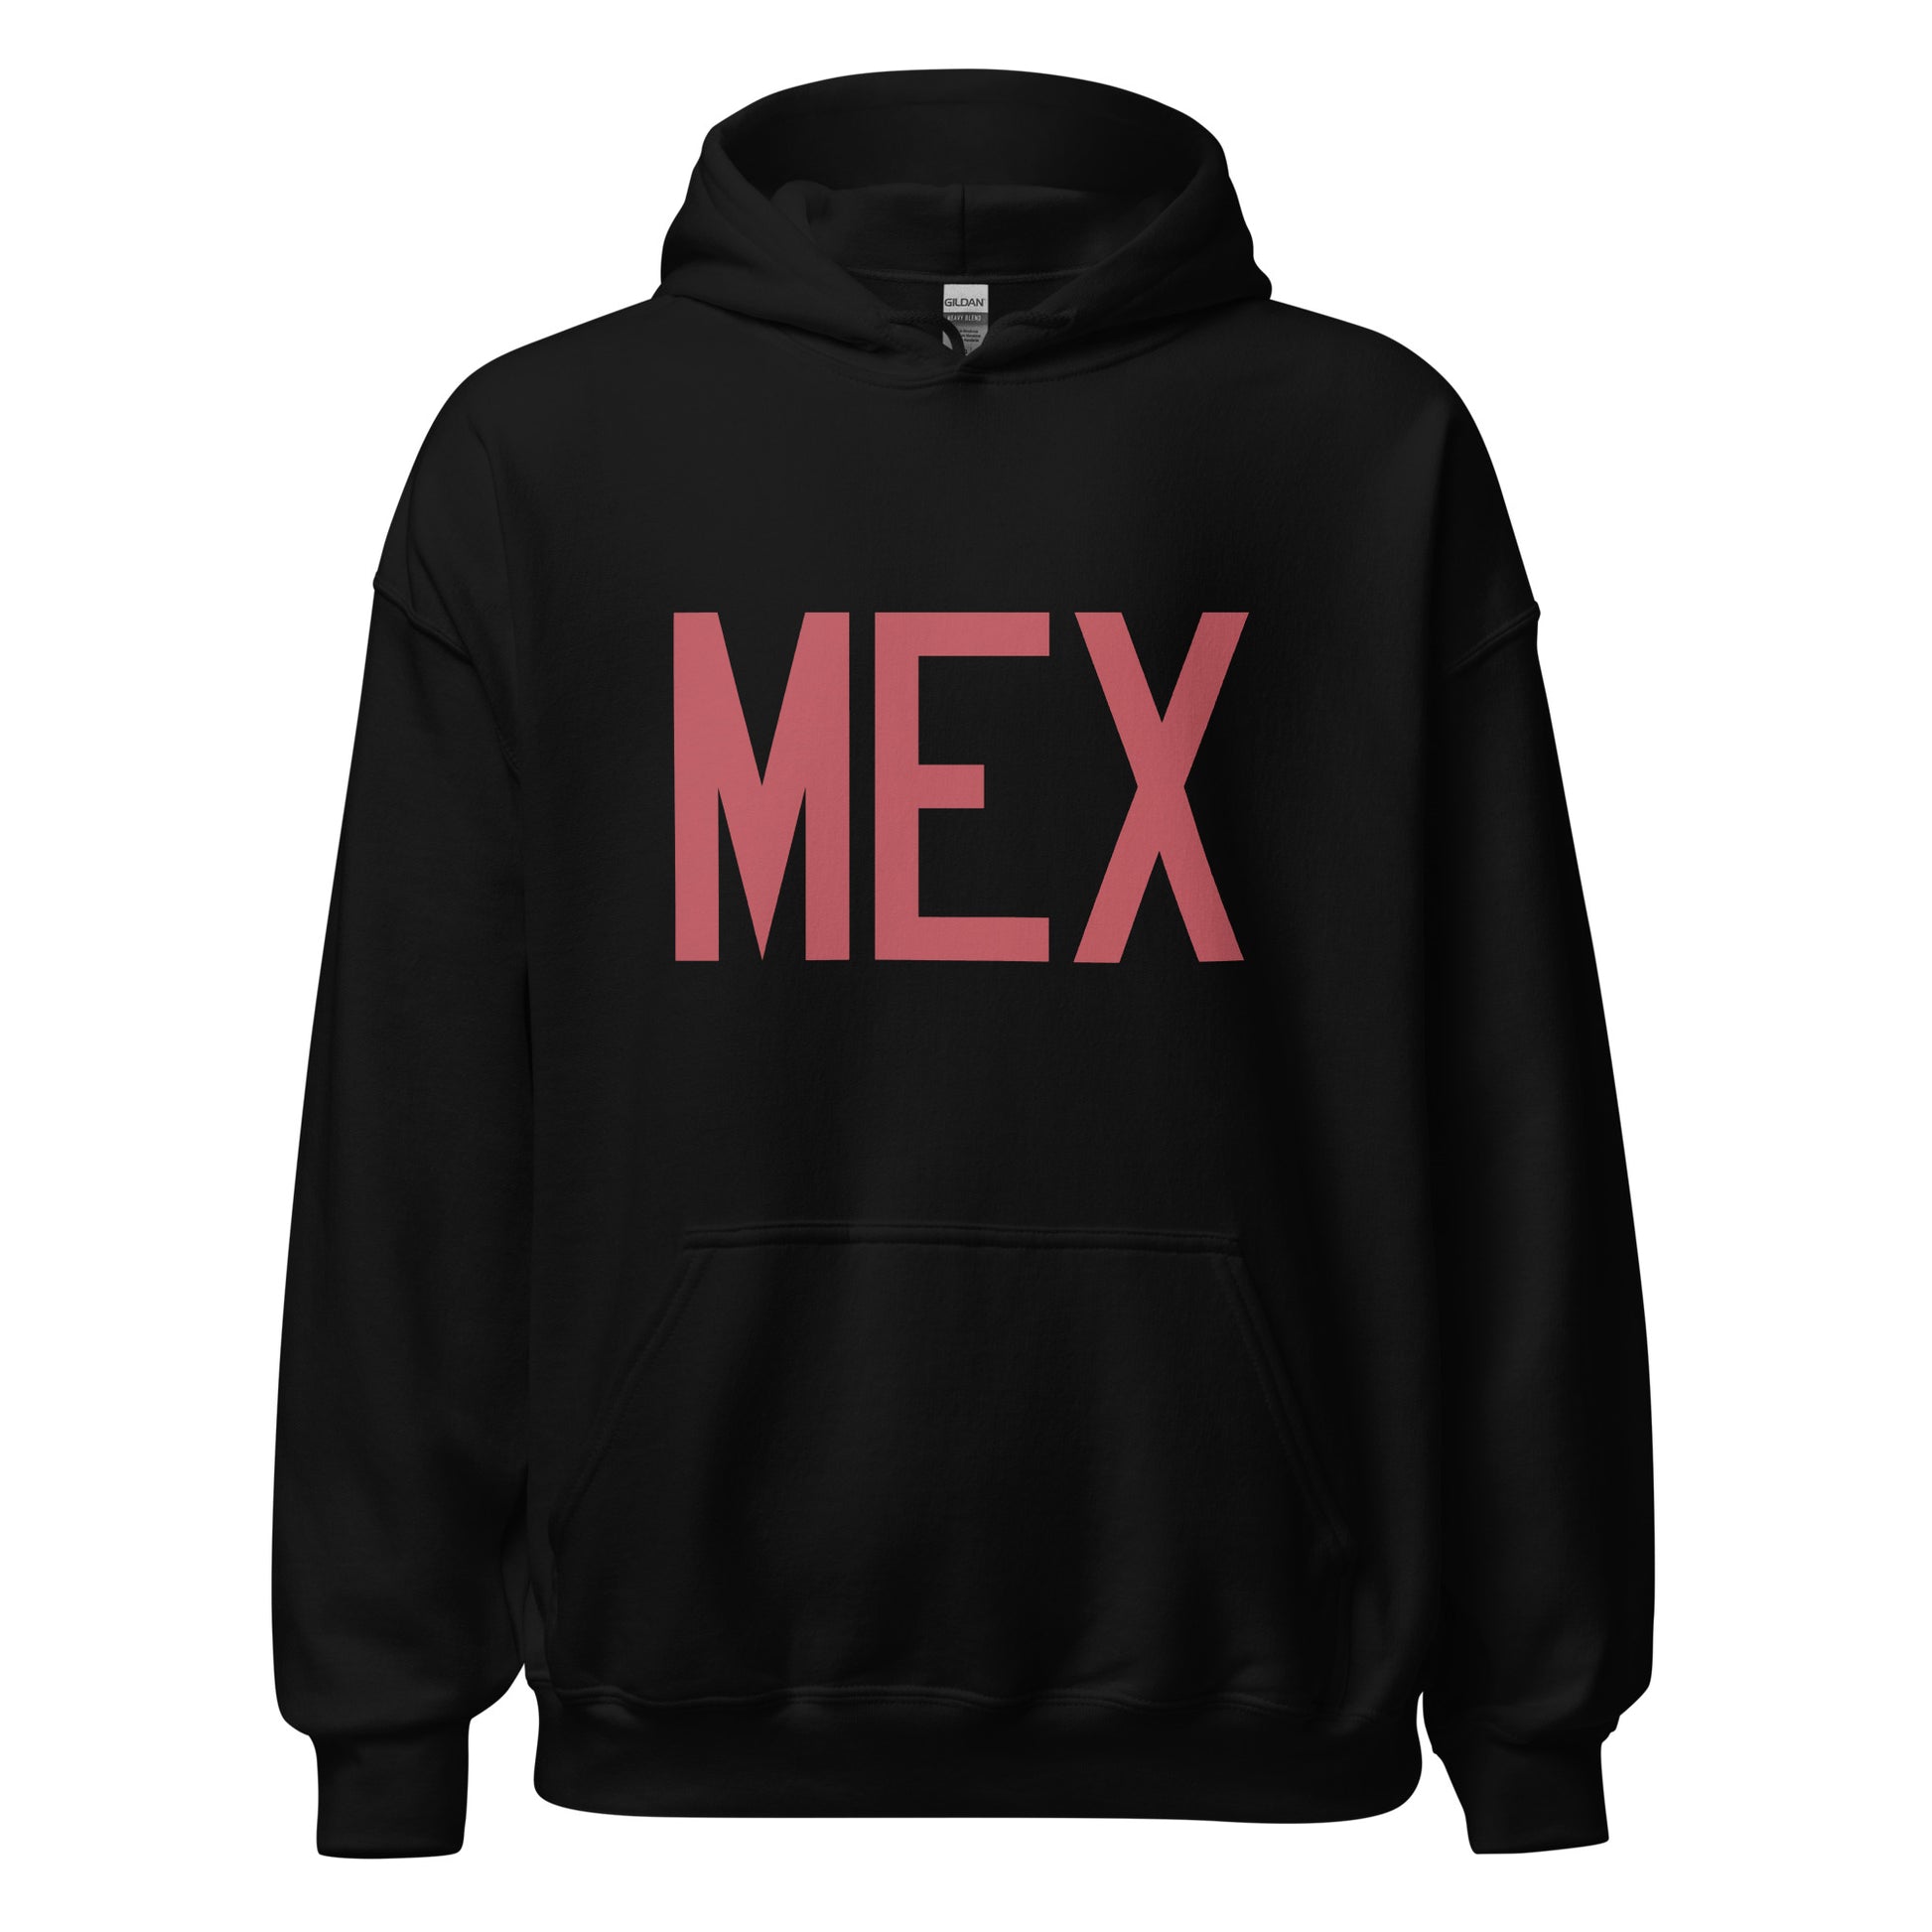 Aviation Enthusiast Hoodie - Deep Pink Graphic • MEX Mexico City • YHM Designs - Image 03